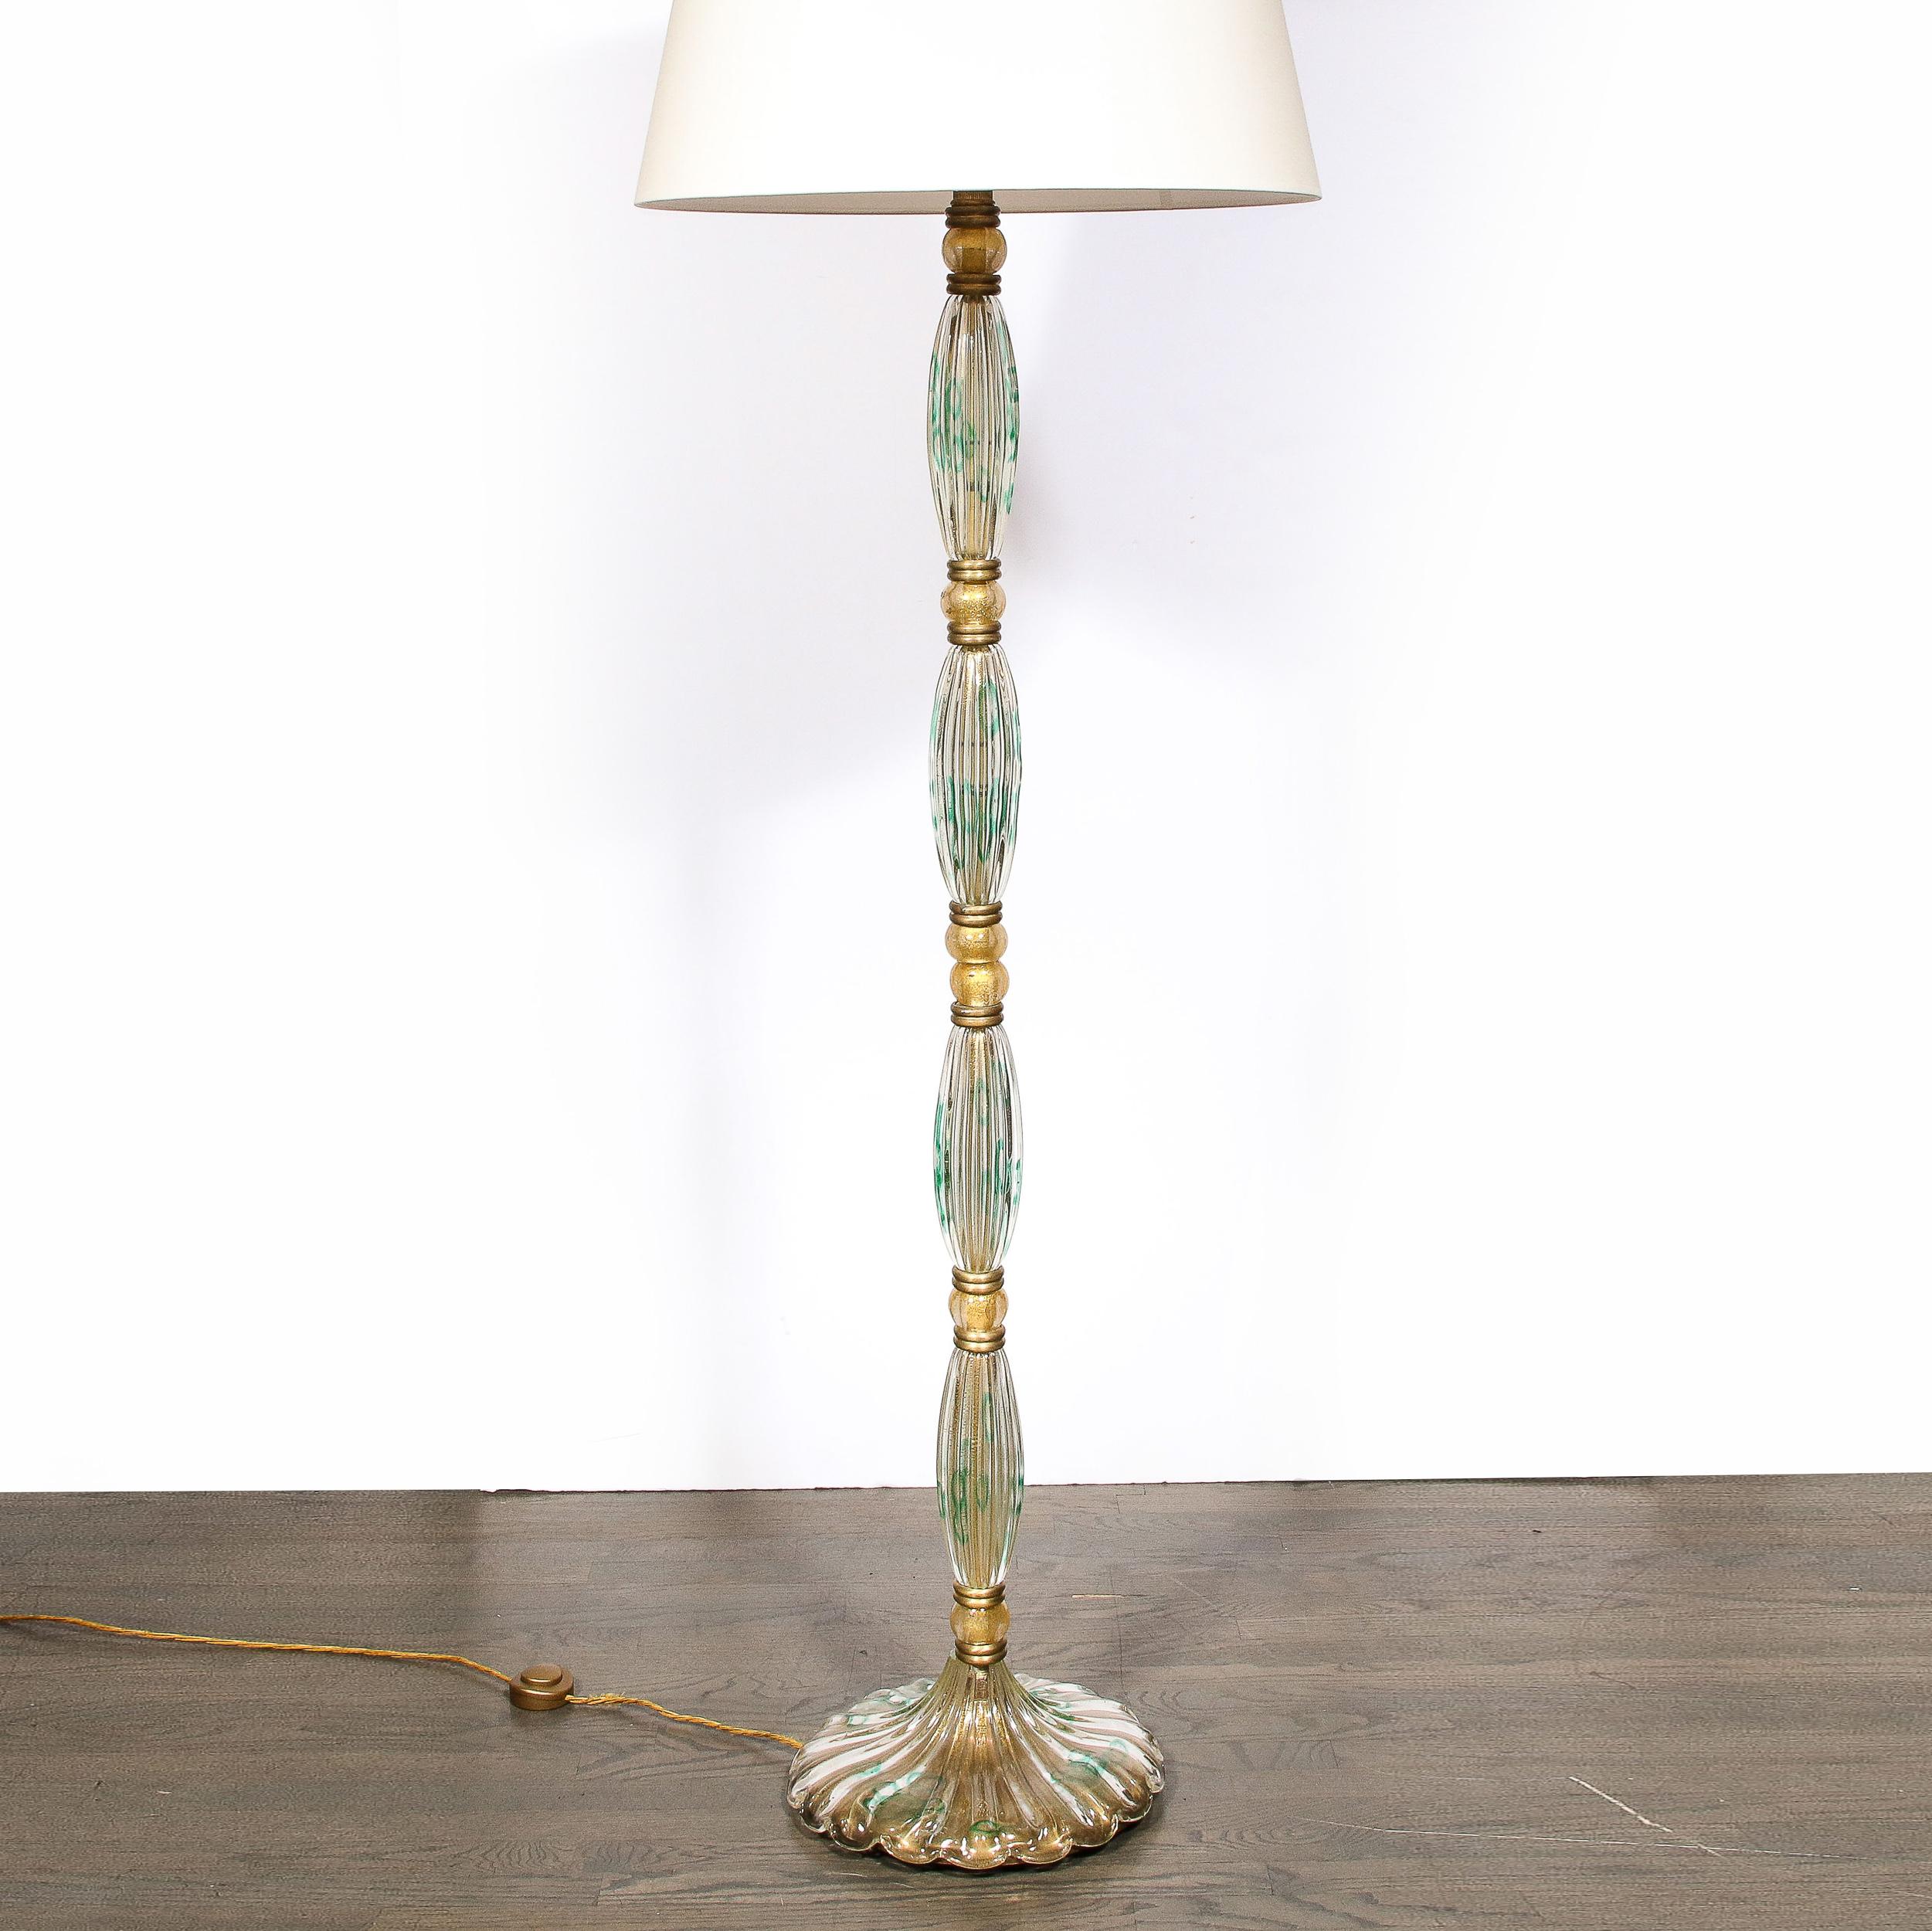 This Mid-Century Modernist Hand-Blown Glass floor lamp is gorgeous and unique, created by one of the oldest and most esteemed companies on earth, Barovier T Tosso, originating from Italy Circa 1950. Known for centuries for their impecable